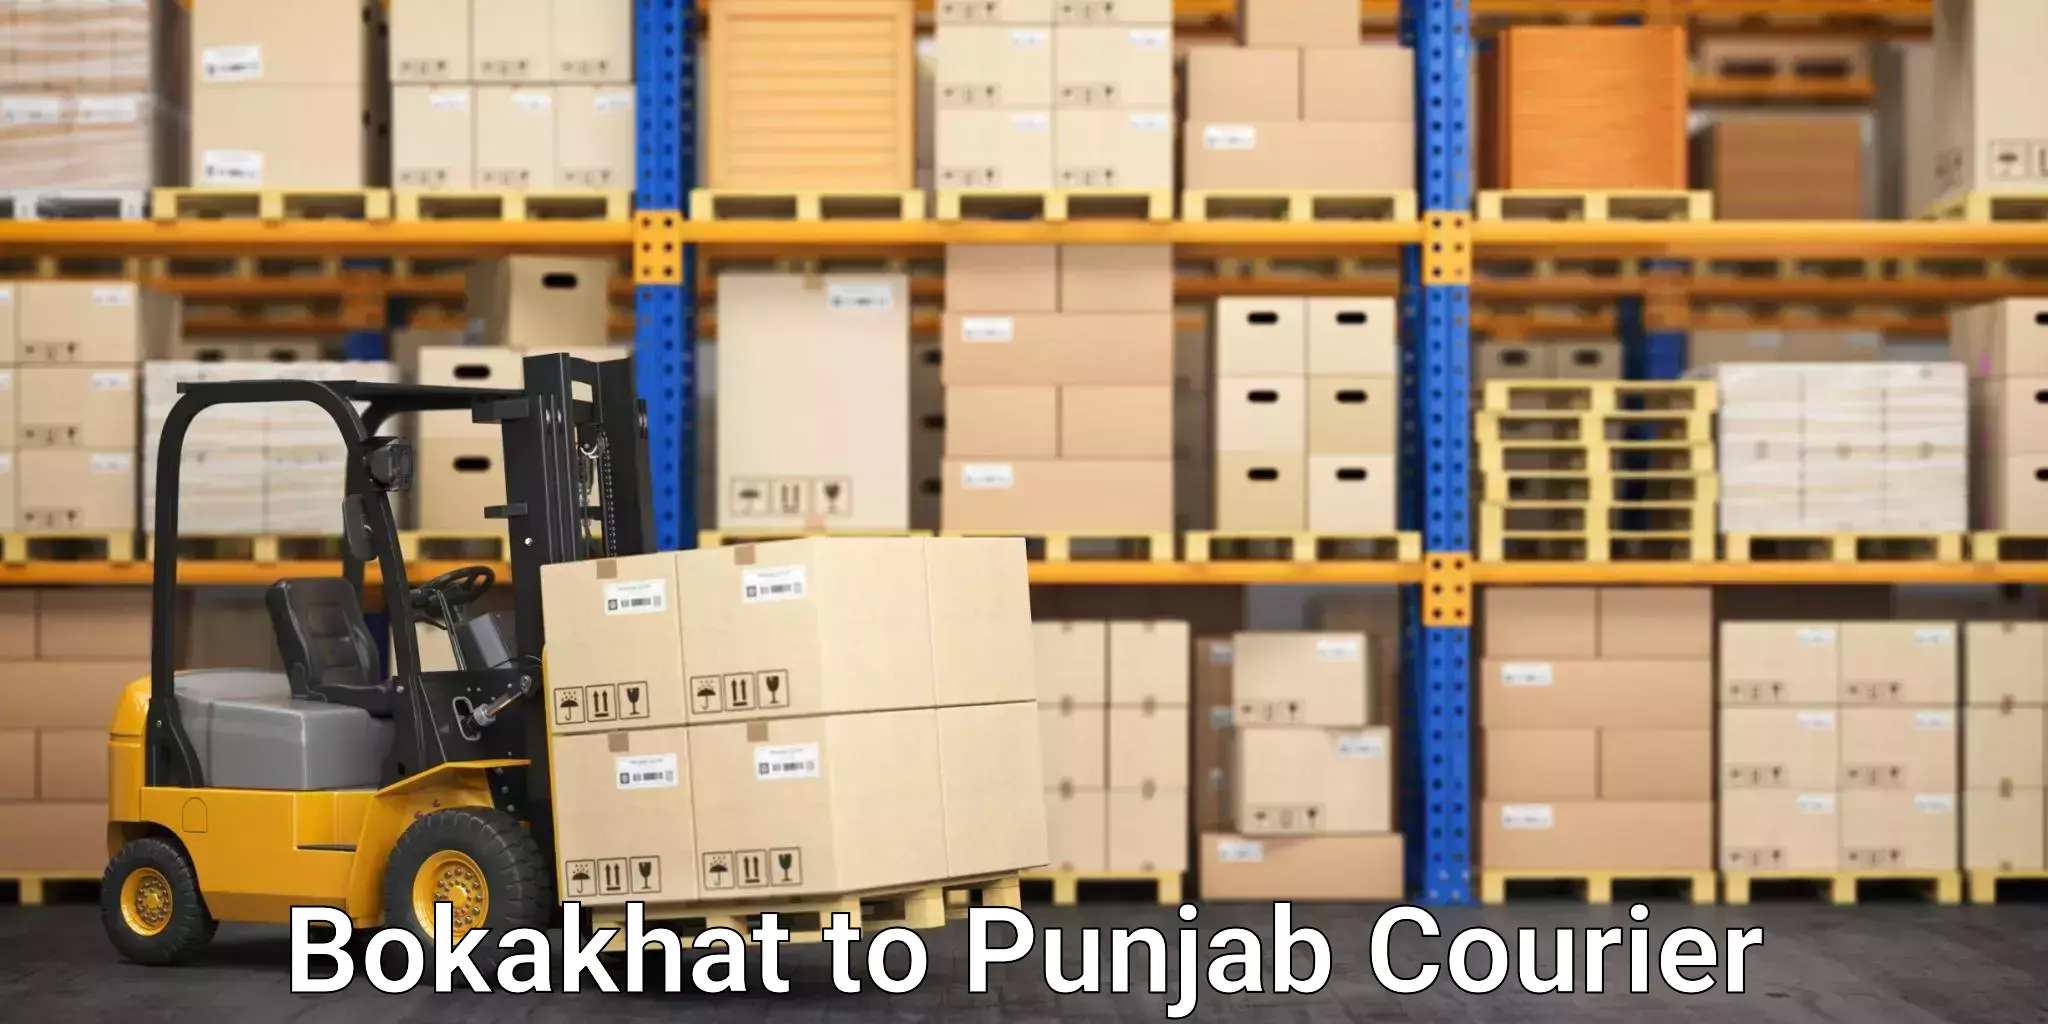 State-of-the-art courier technology Bokakhat to Zirakpur